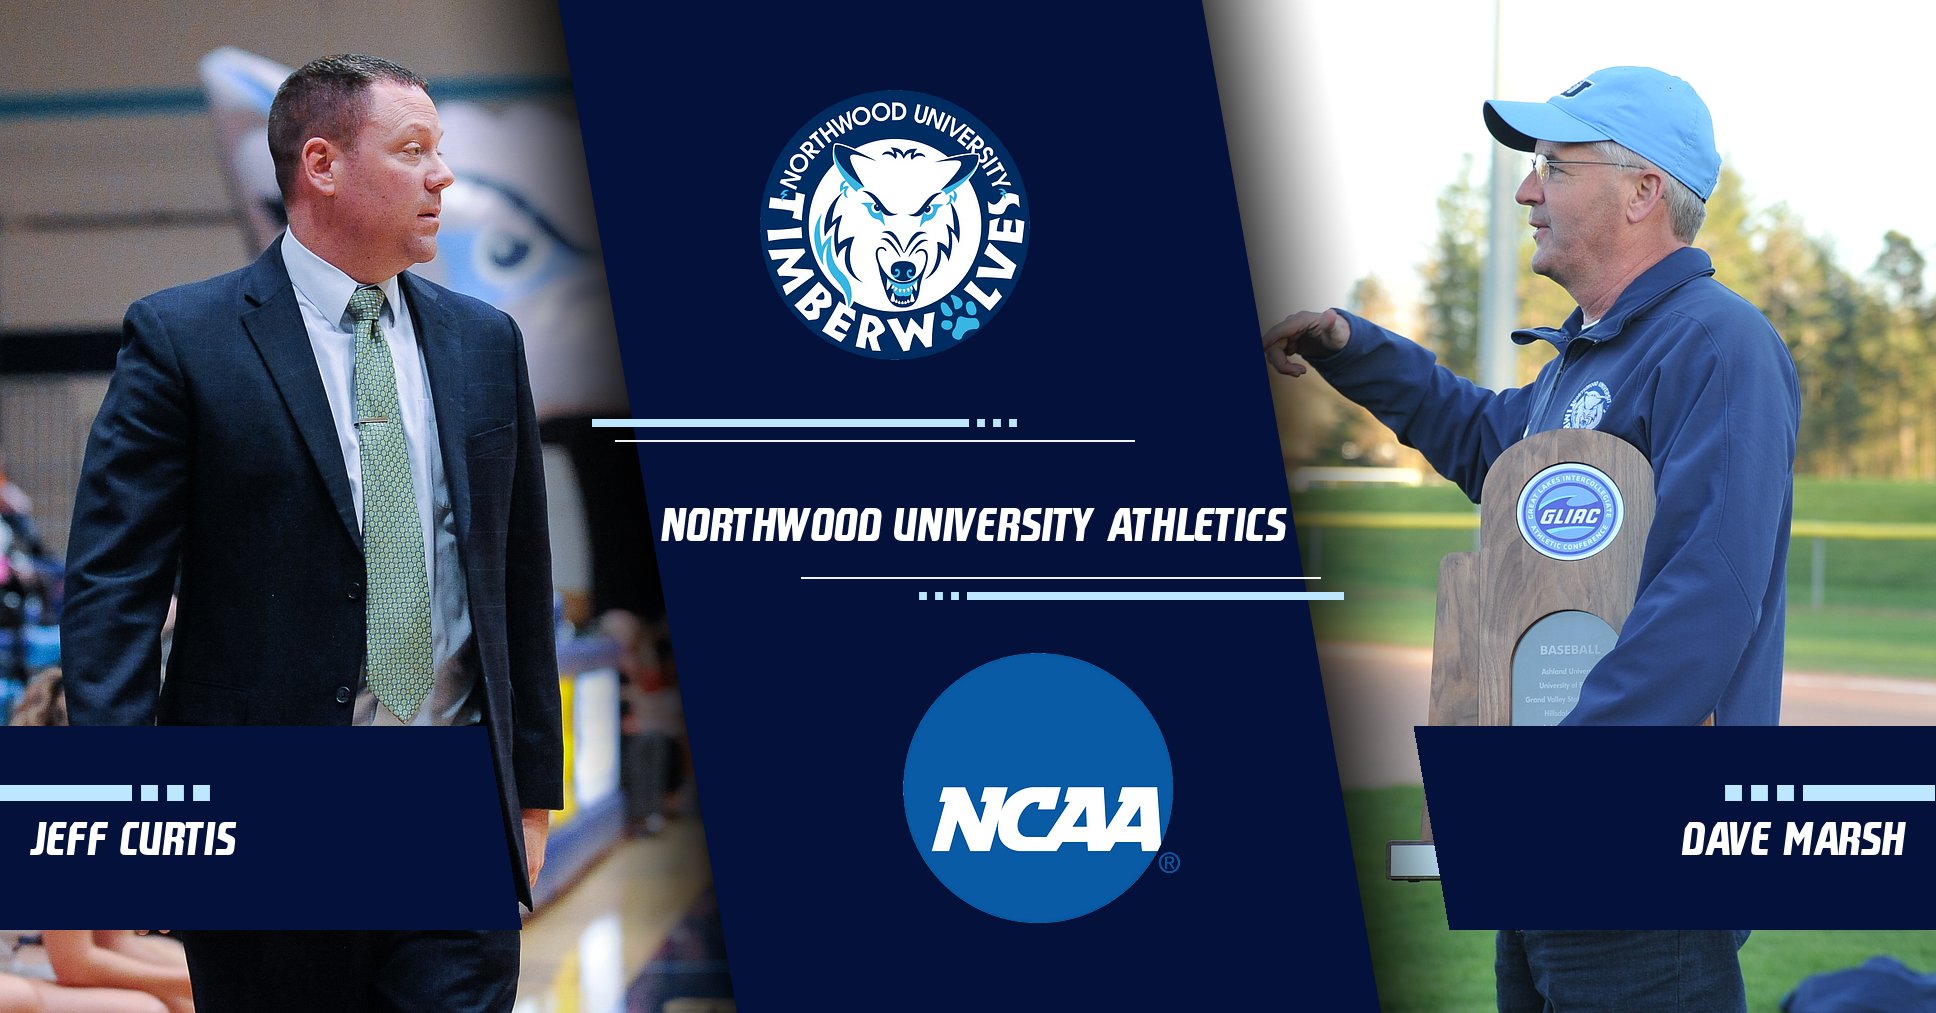 Dave Marsh Moves To Academic Role At Northwood - Jeff Curtis Named New Athletic Director